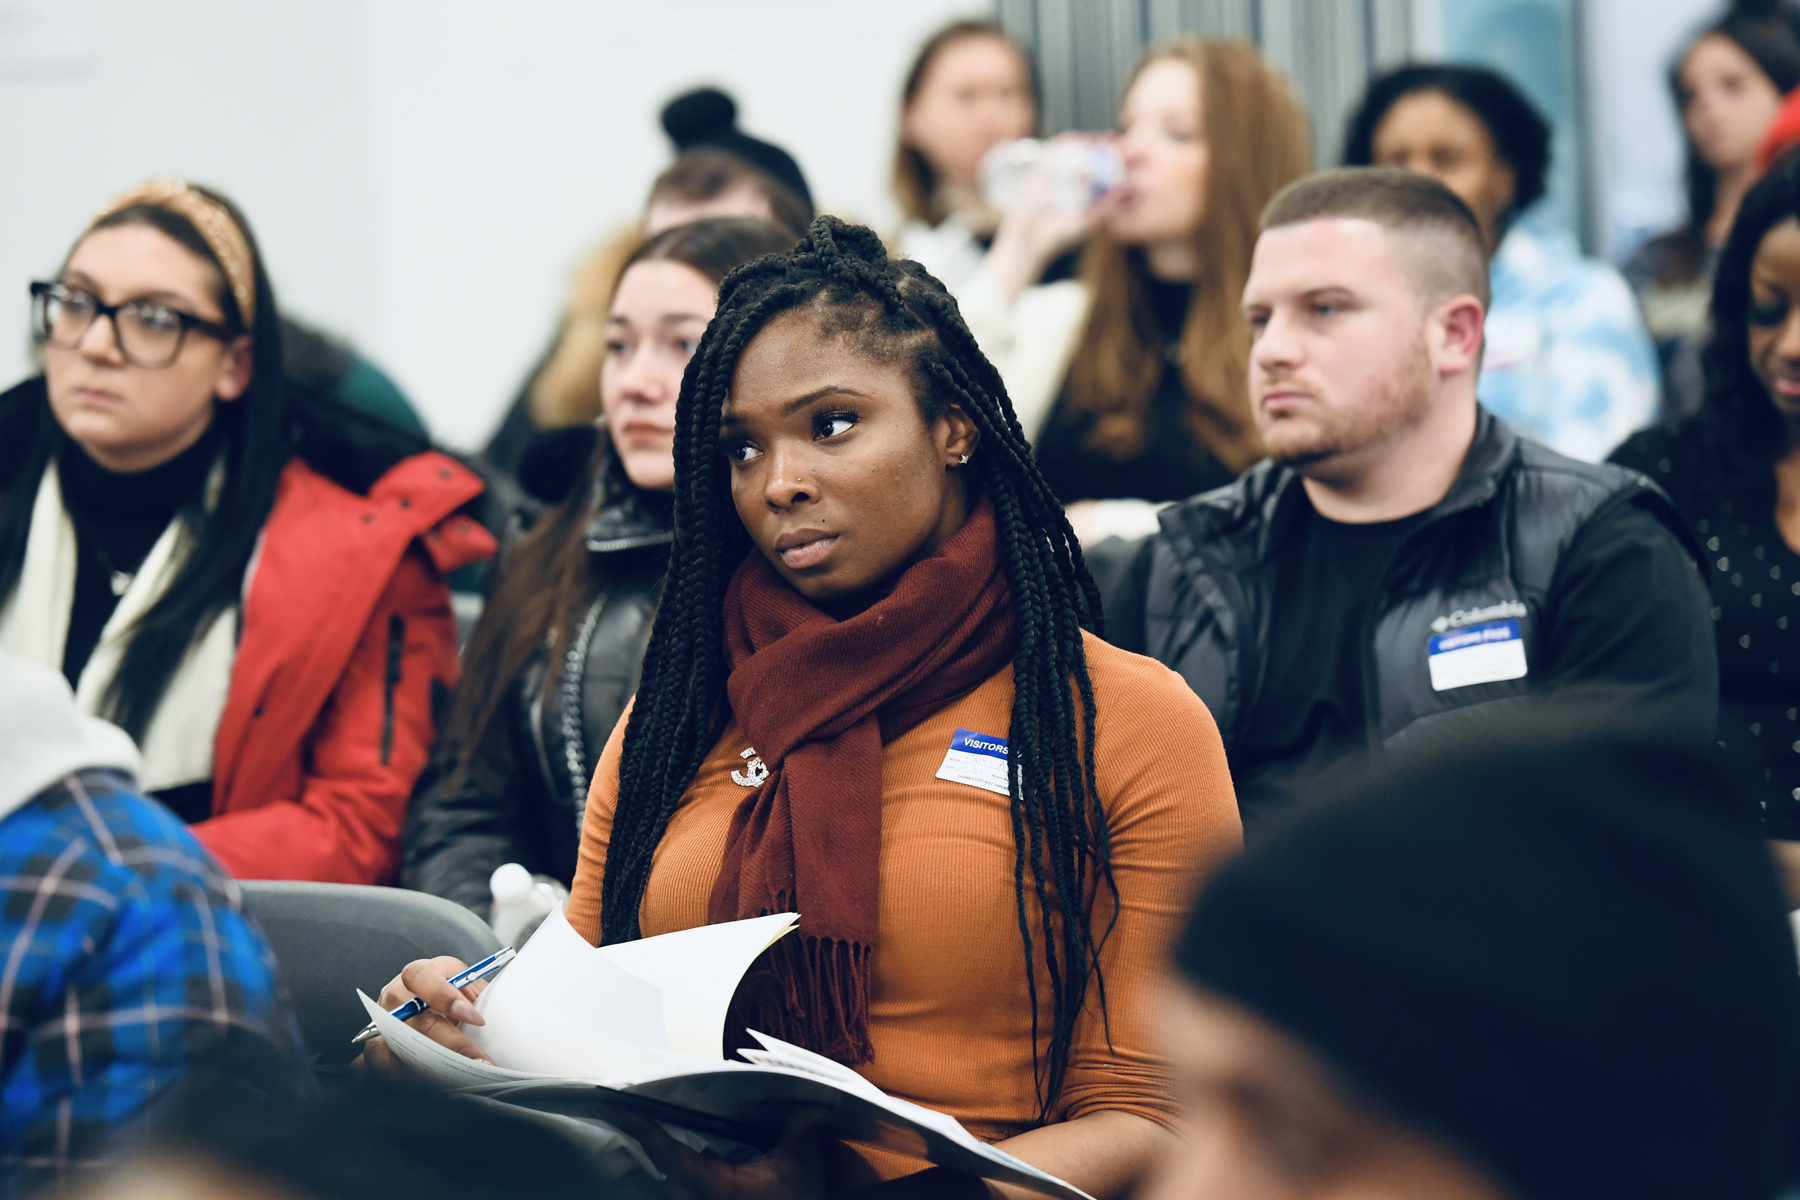 Focusing on the future: At the recent orientation for new NYSCAS students, applicants from across the city learned valuable information and began friendships that would last their academic careers and beyond.